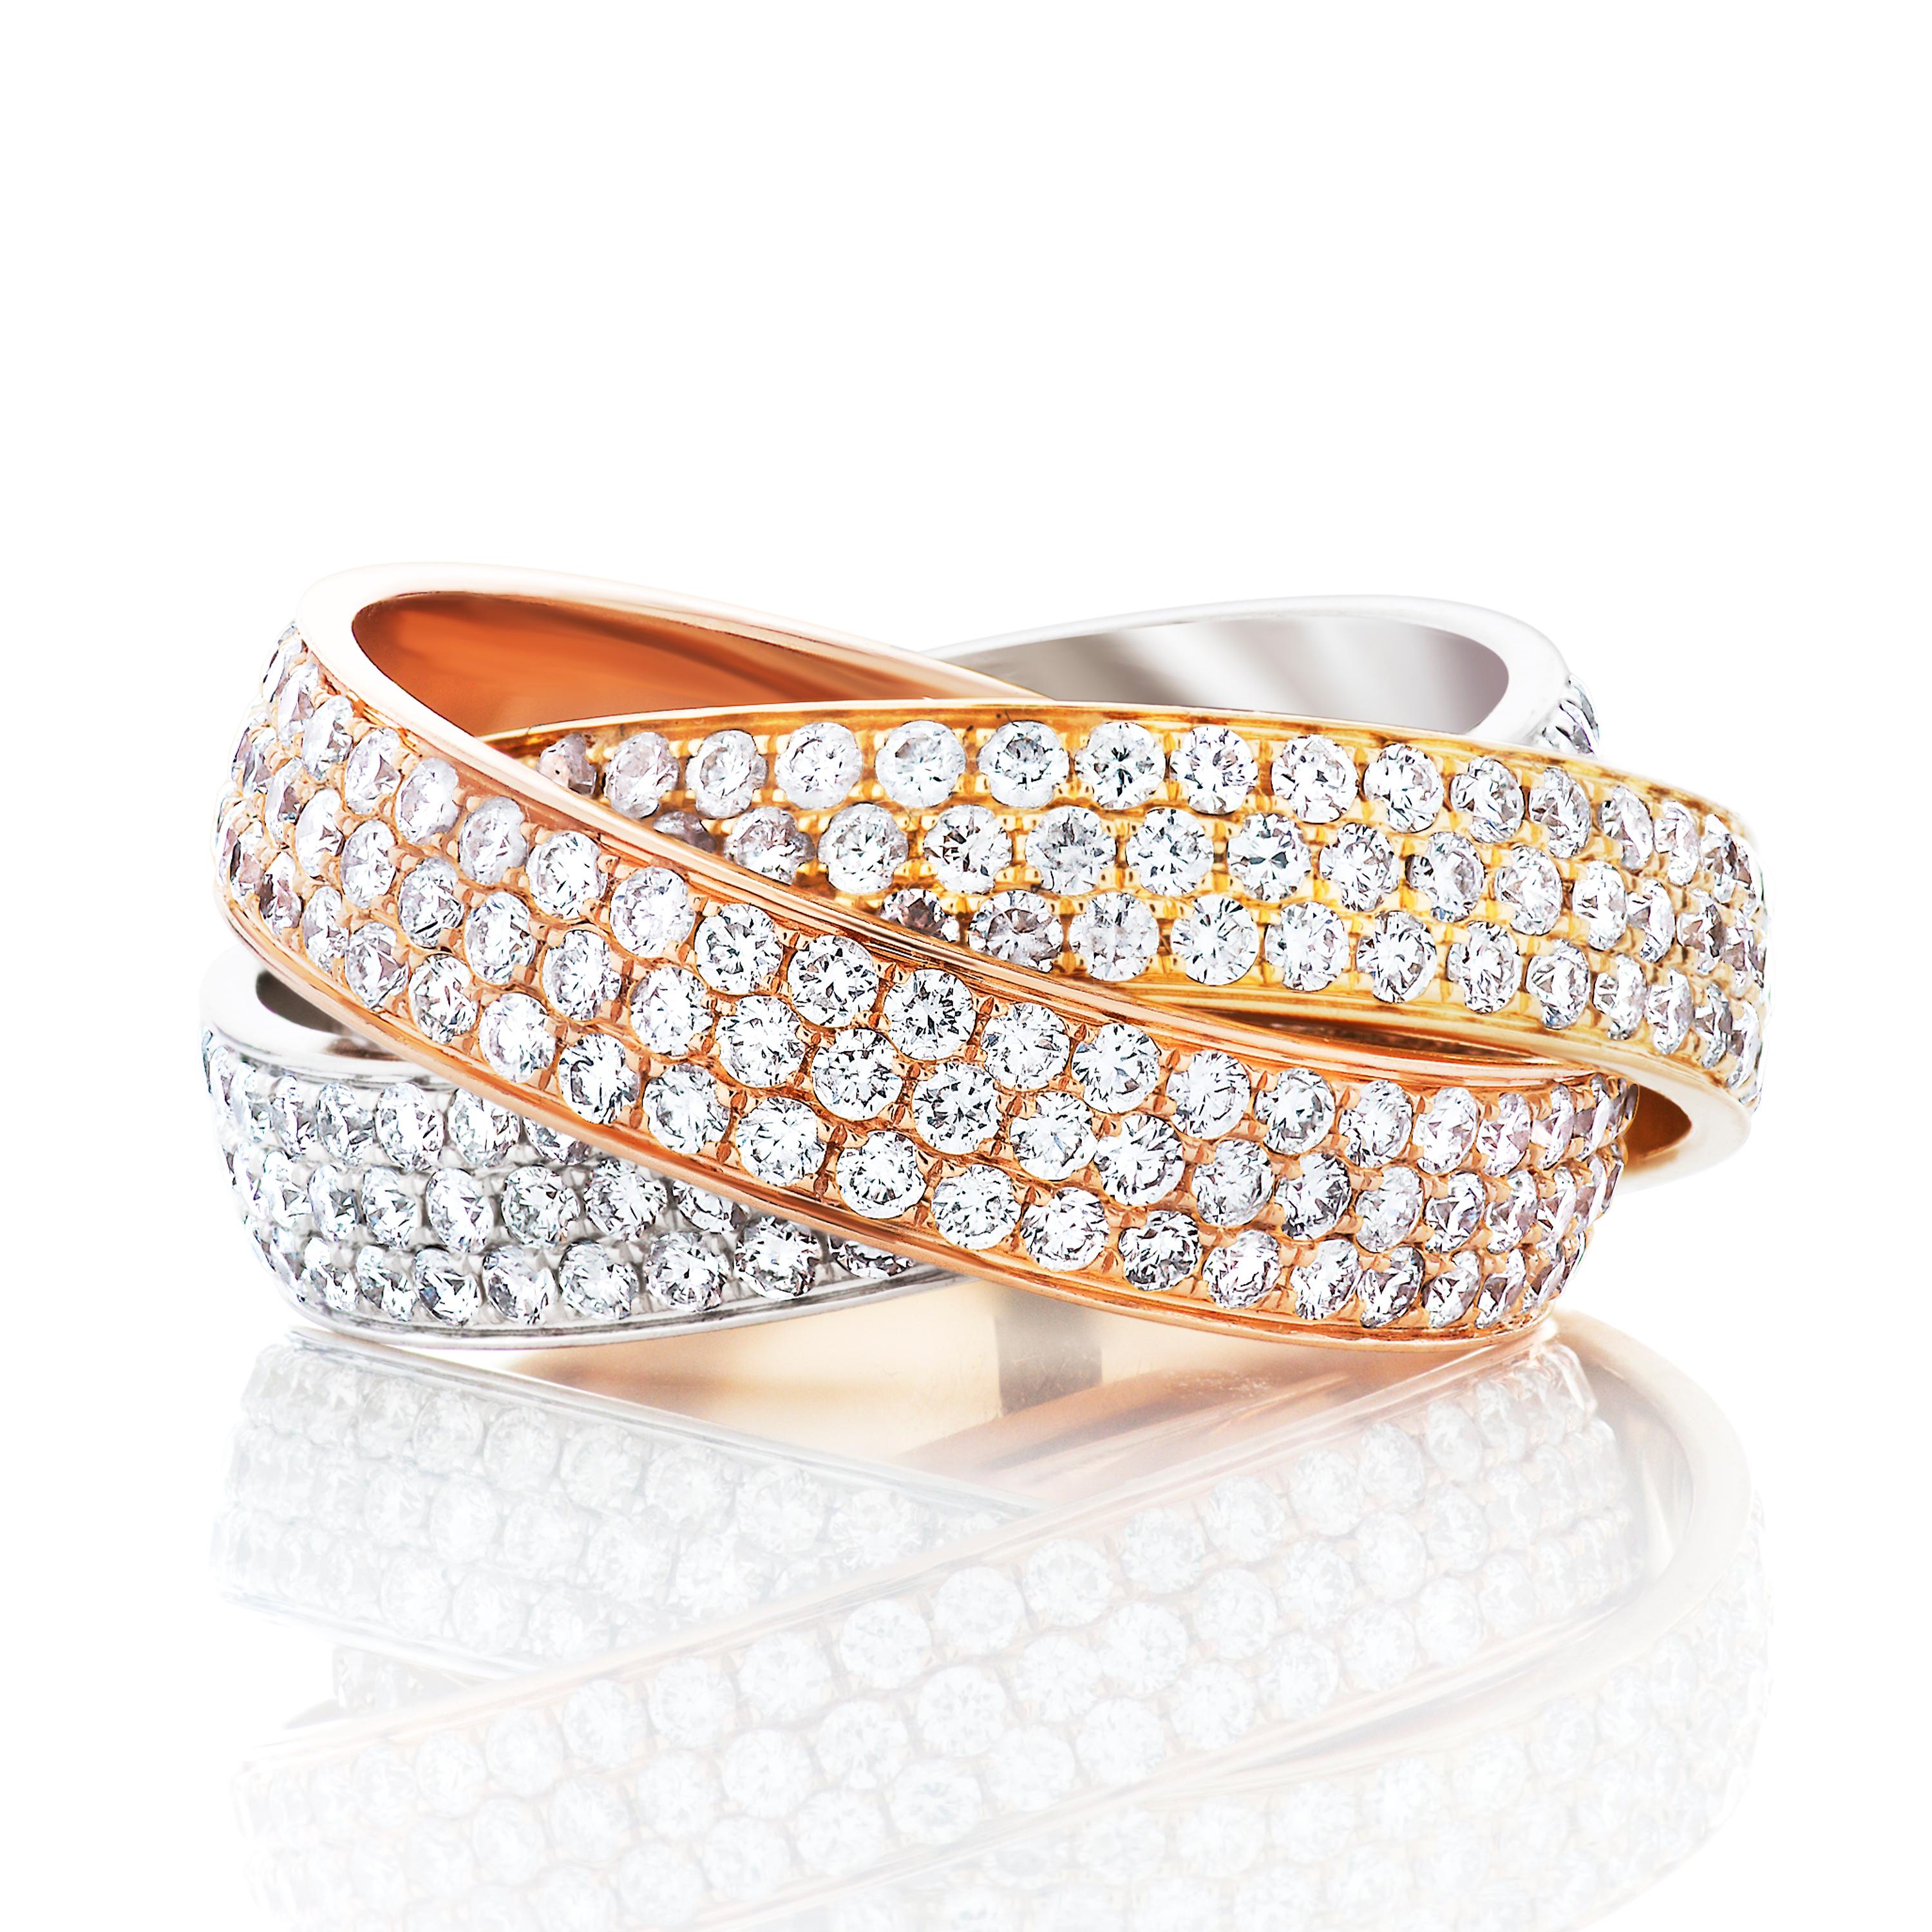 Cartier large model diamond Trinity rolling ring in 18k white, yellow and rose gold. 

This Cartier ring features 3 interlocking bands pave set with approximately 4.64 carat of round brilliant cut diamonds, it is accompanied by Cartier certificate